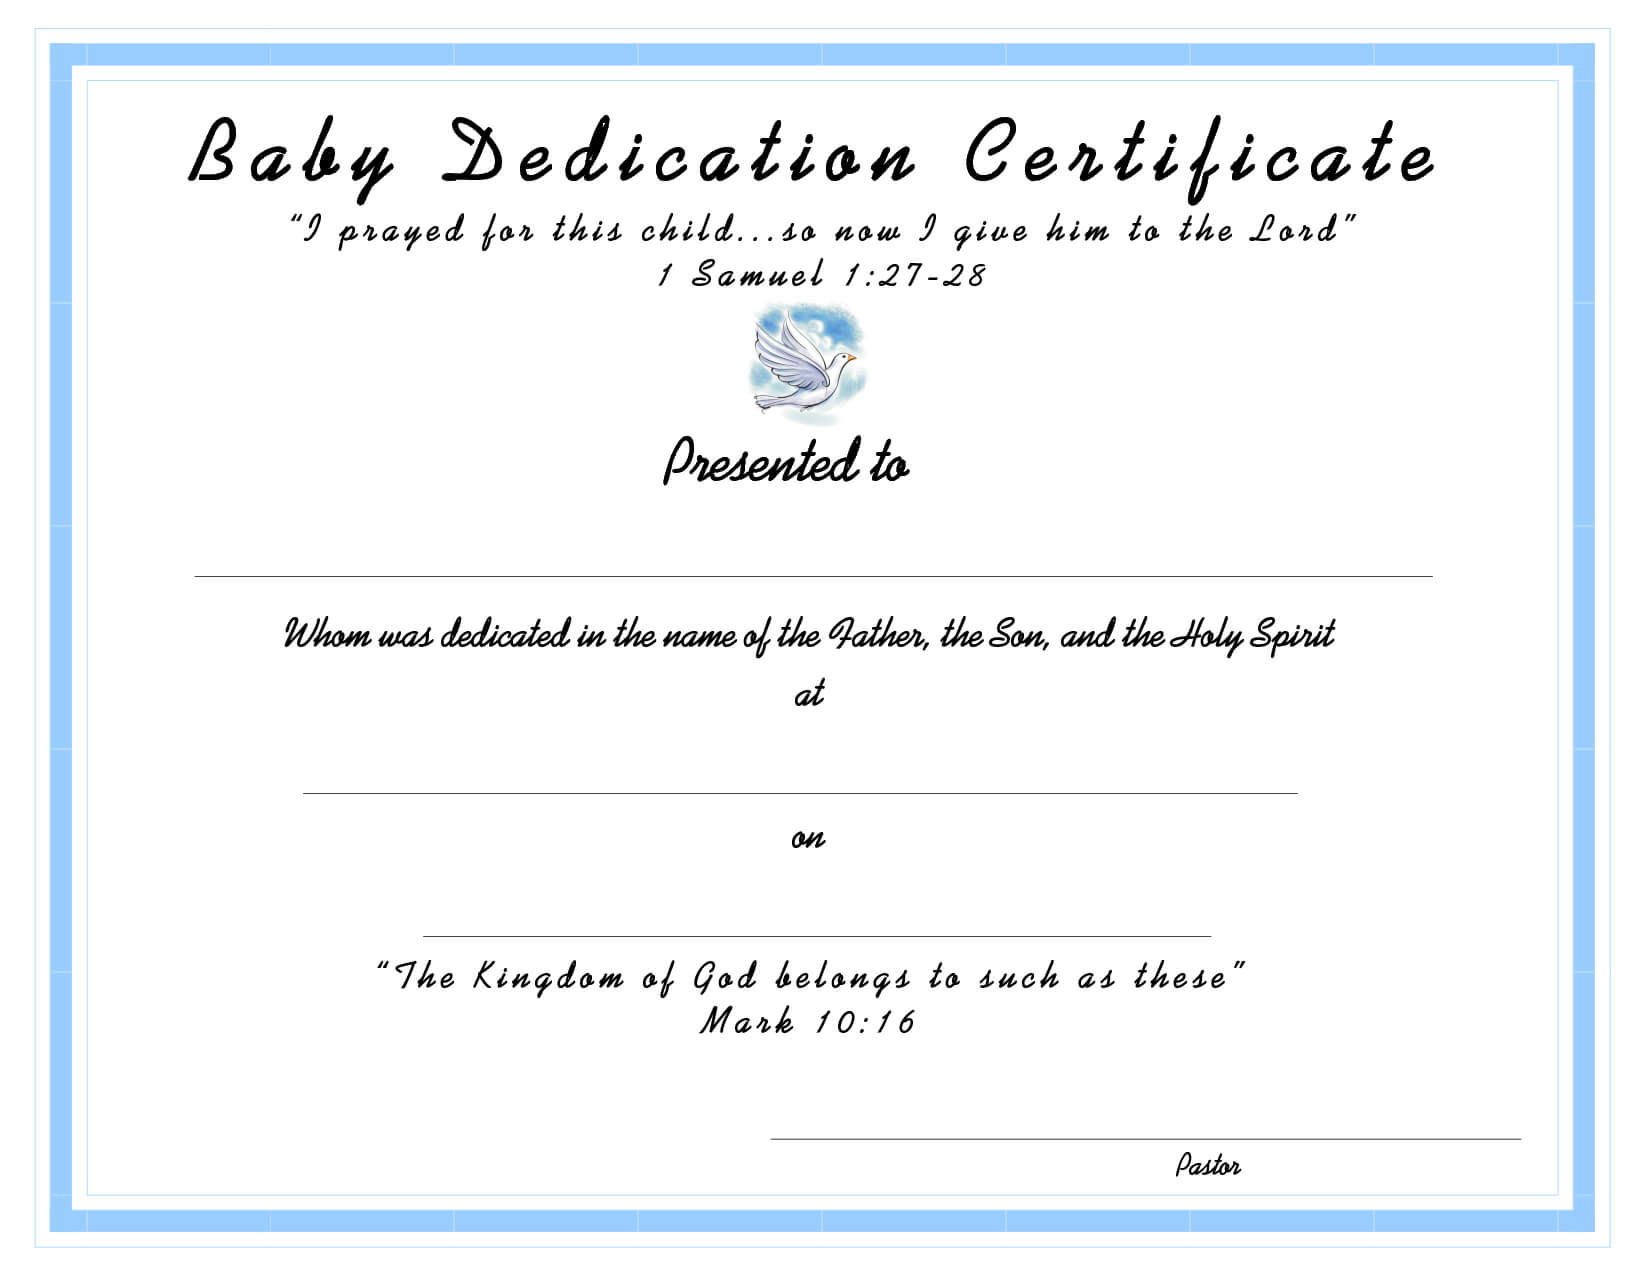 Baby Dedication Document Sample1650 X 1275 84 Kb Png X Inside Baby Dedication Certificate Template